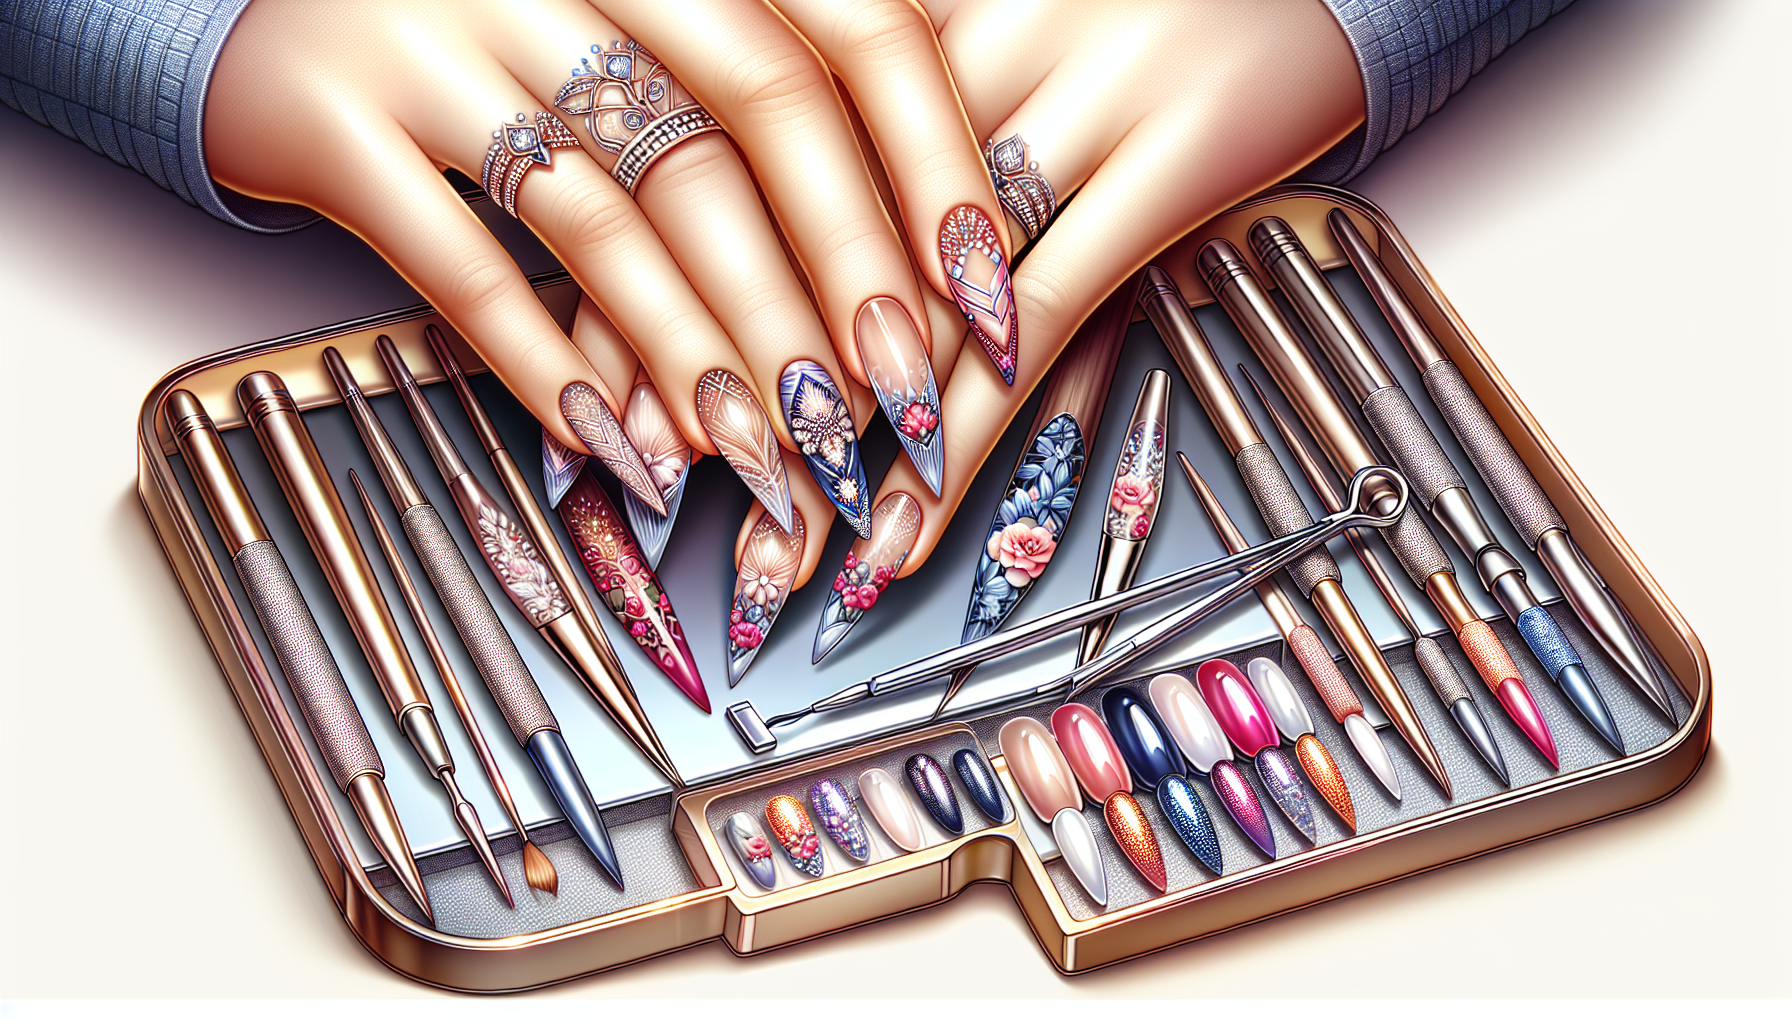 Illustration of advanced nail art techniques with gel polish and nail kit